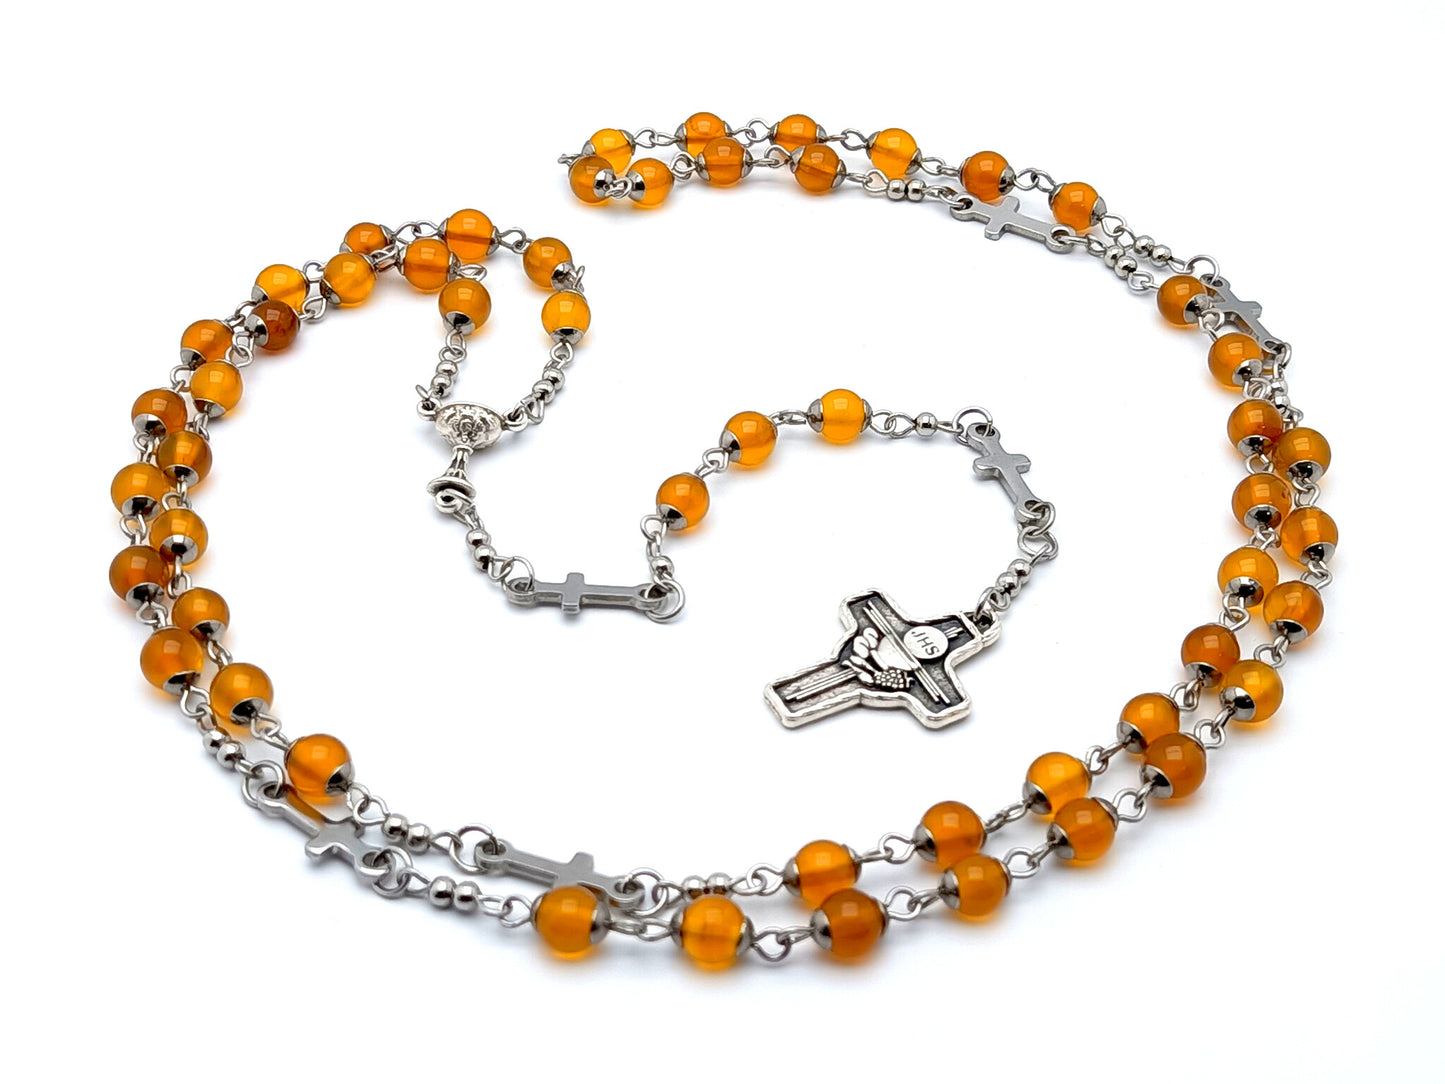 Holy Communion unique rosary beads with orange agate gemstone beads, Holy Eucharist crucifx and chalice centre medal.